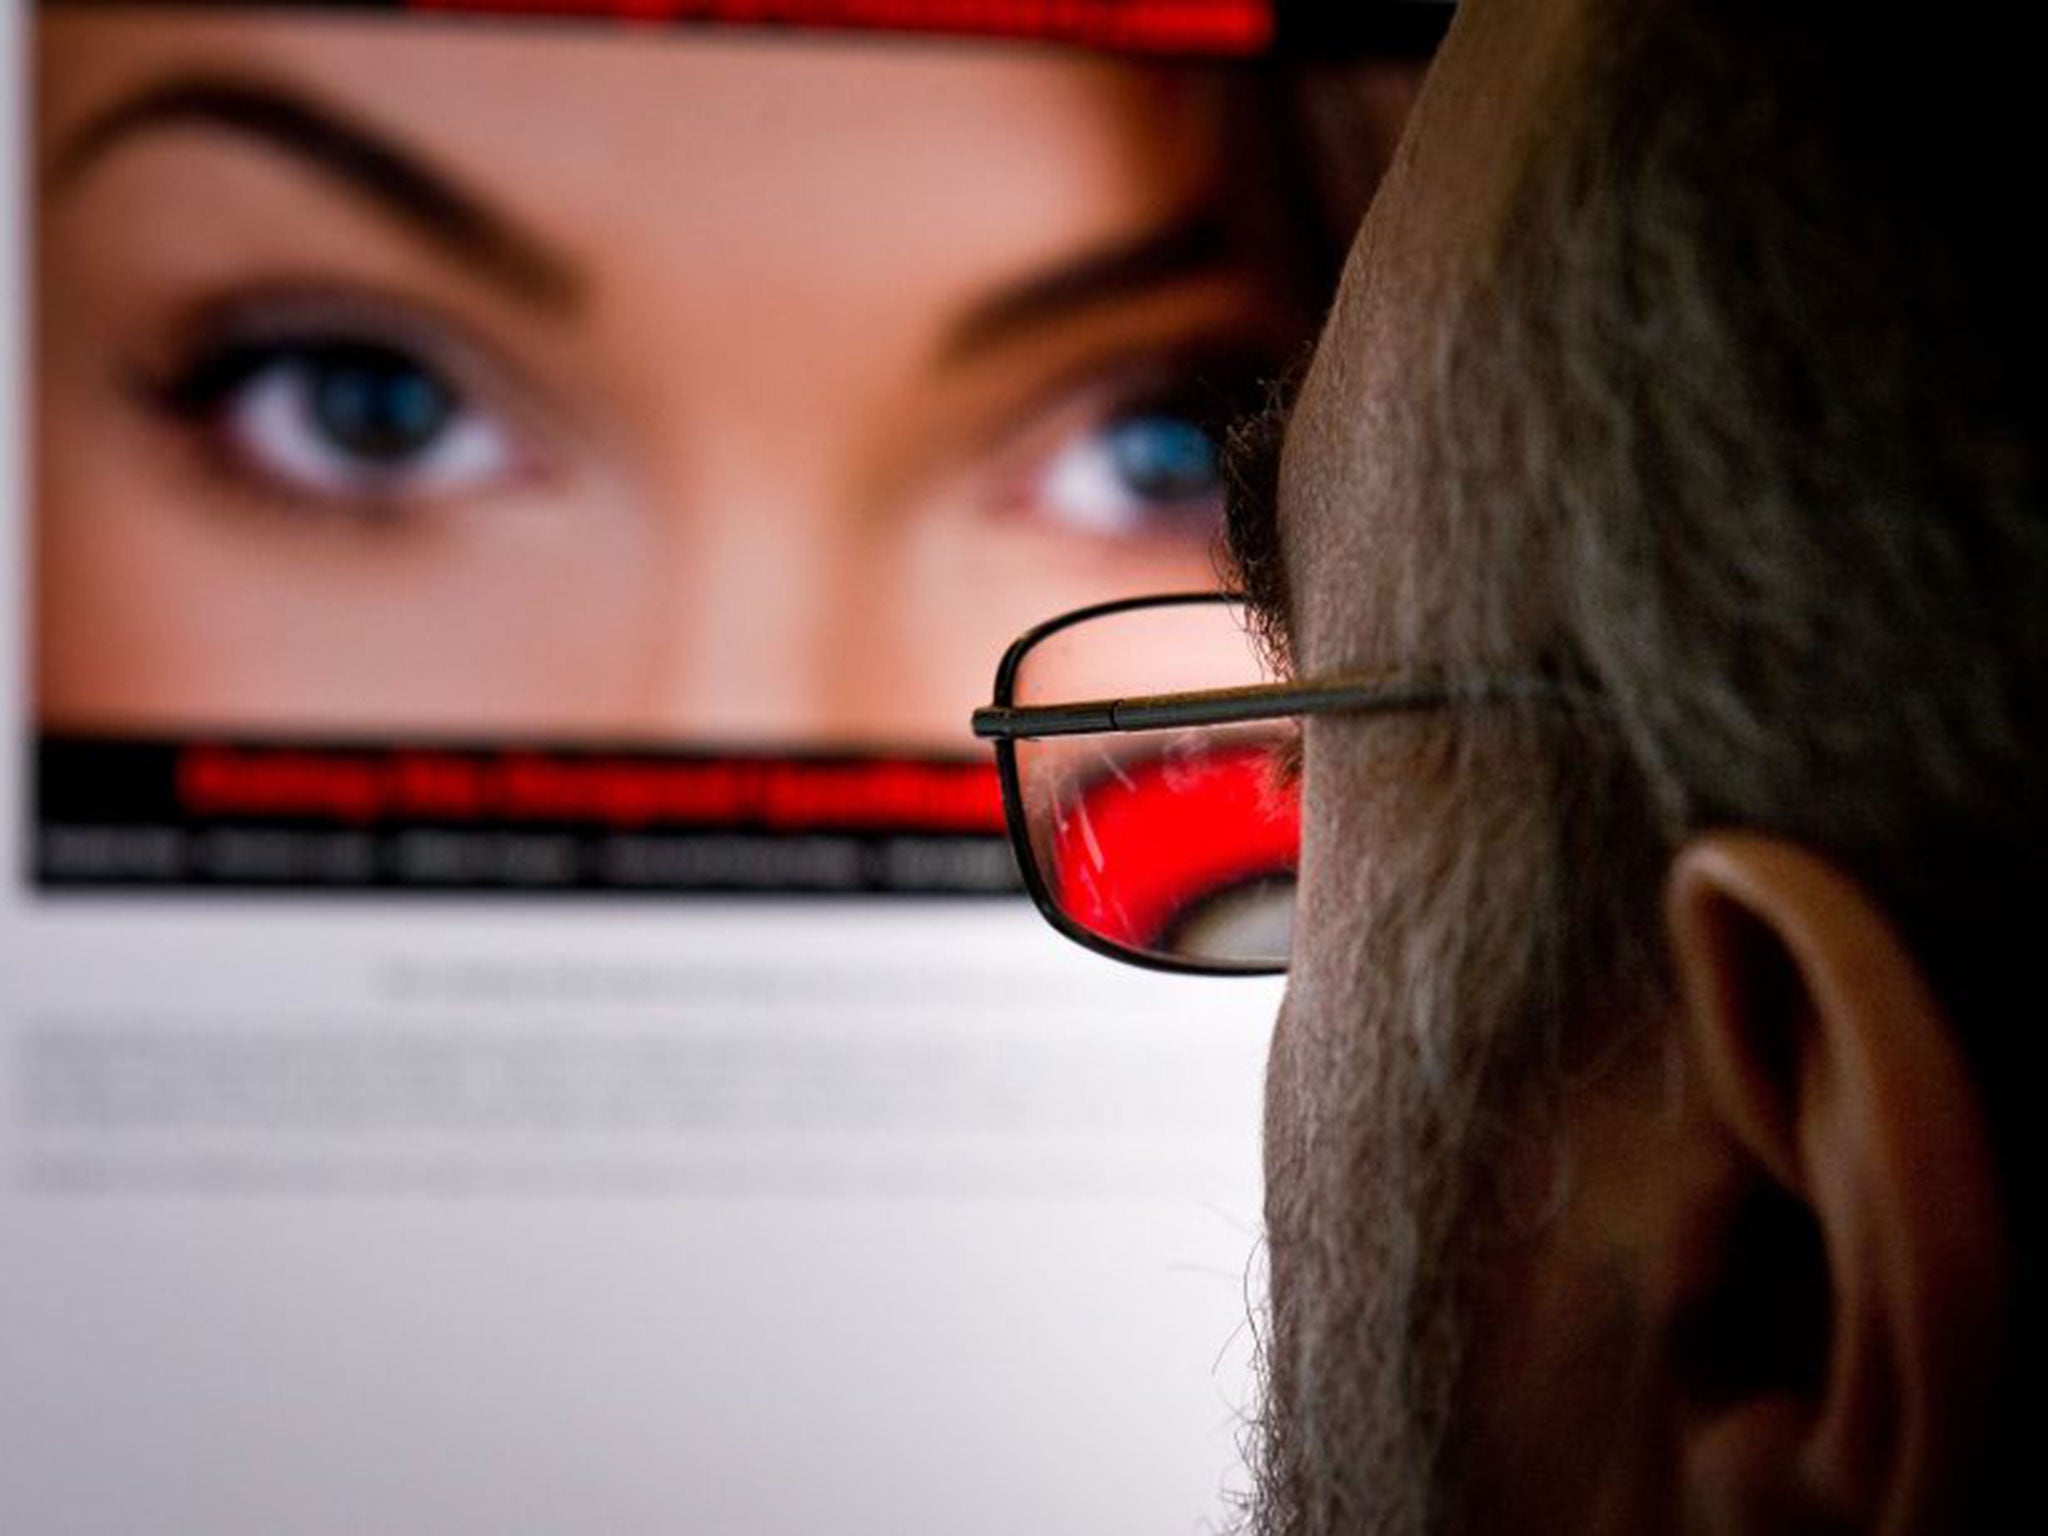 Britain’s spies have been looking through leaked files from the Ashley Madison adultery website – to see if they have anything to worry about but also whether they can use it to obtain intelligence